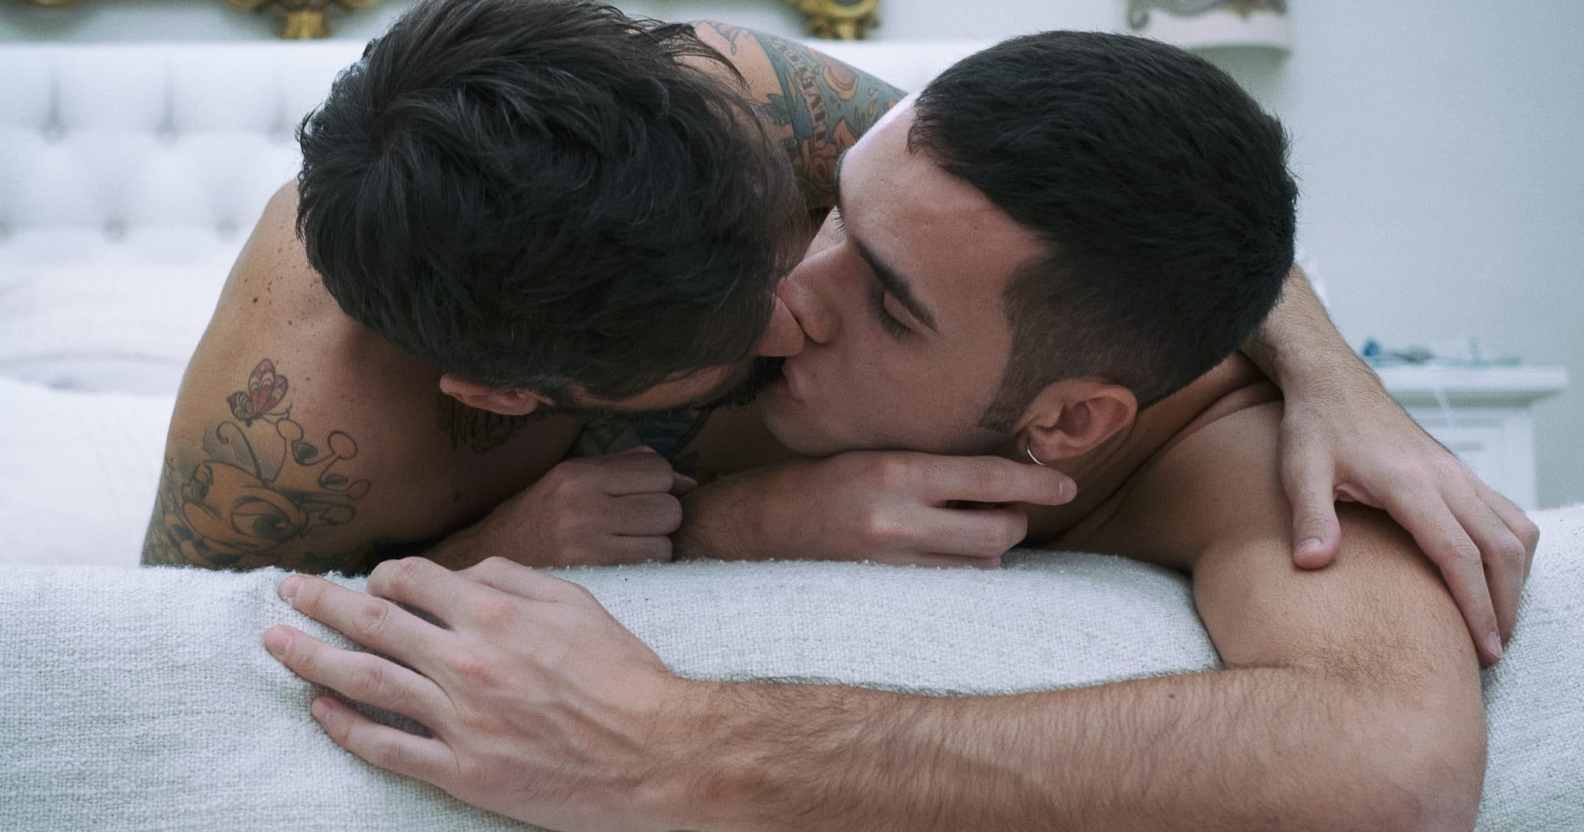 Leisbein - Gay porn: I'm a lesbian who loves gay male porn. Here's why